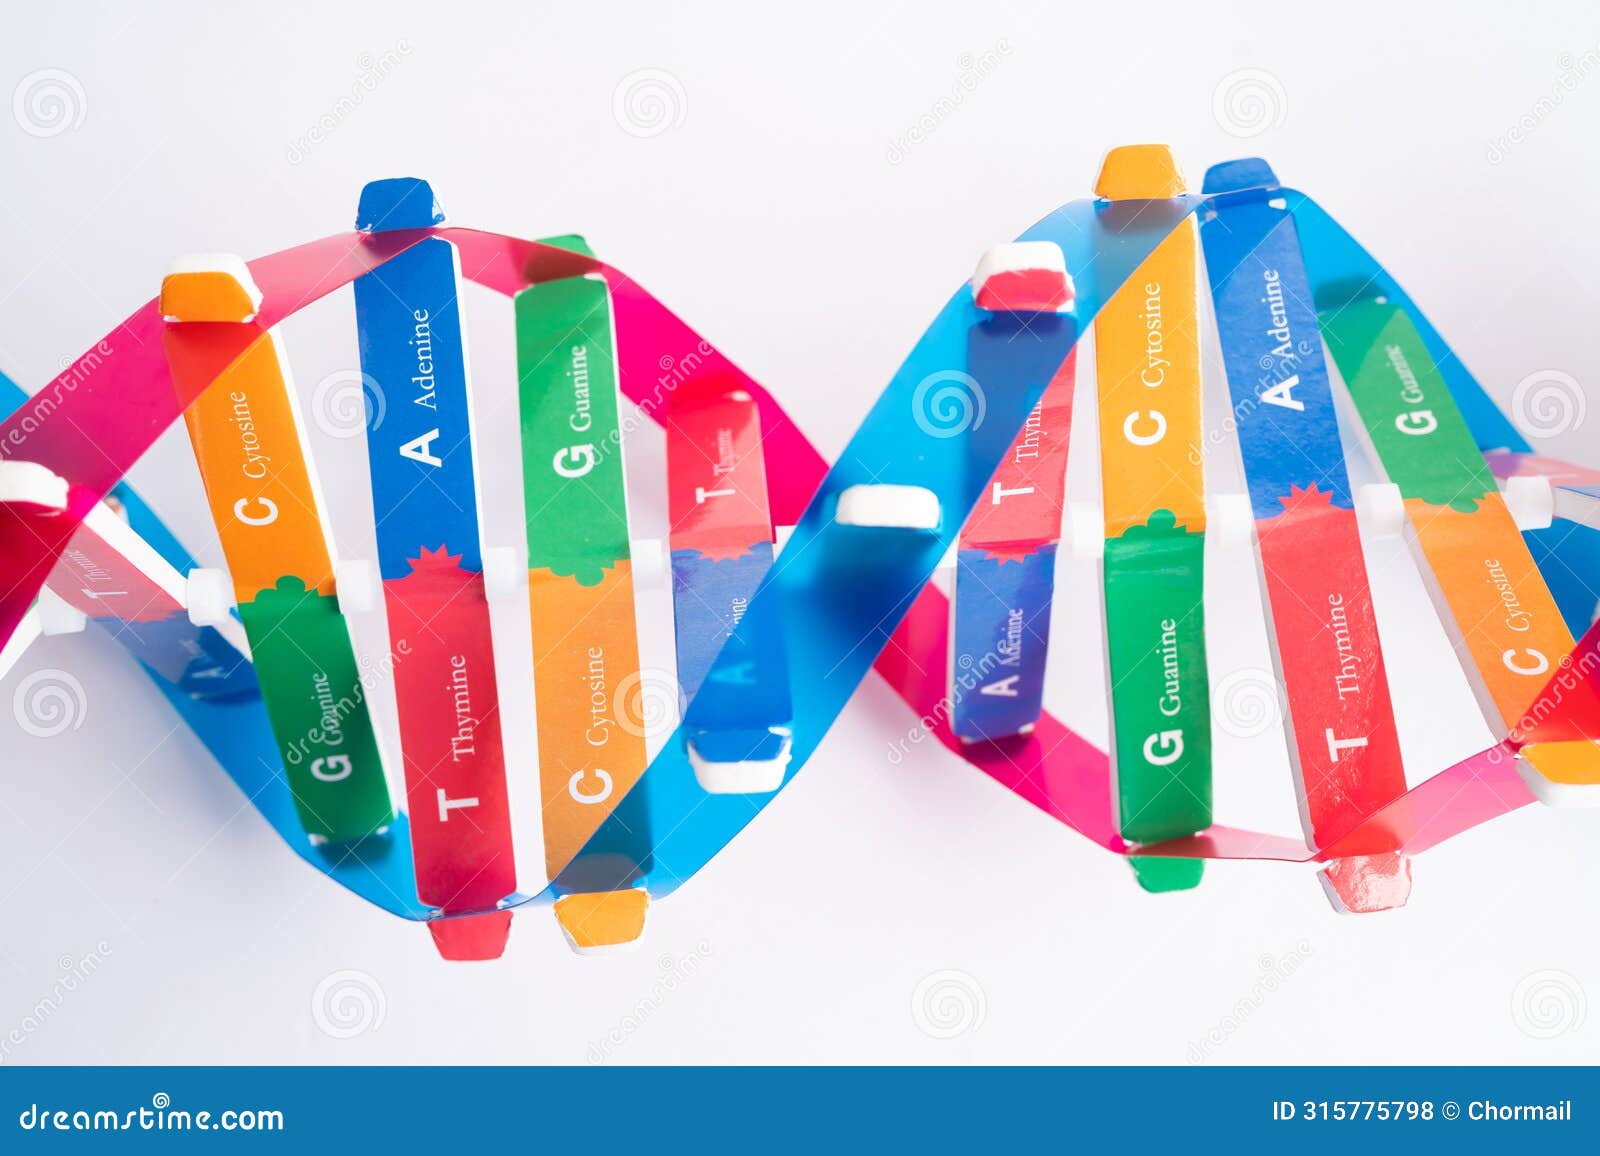 dna or deoxyribonucleic acid is a double helix chains structure formed by base pairs attached to a sugar phosphate backbone